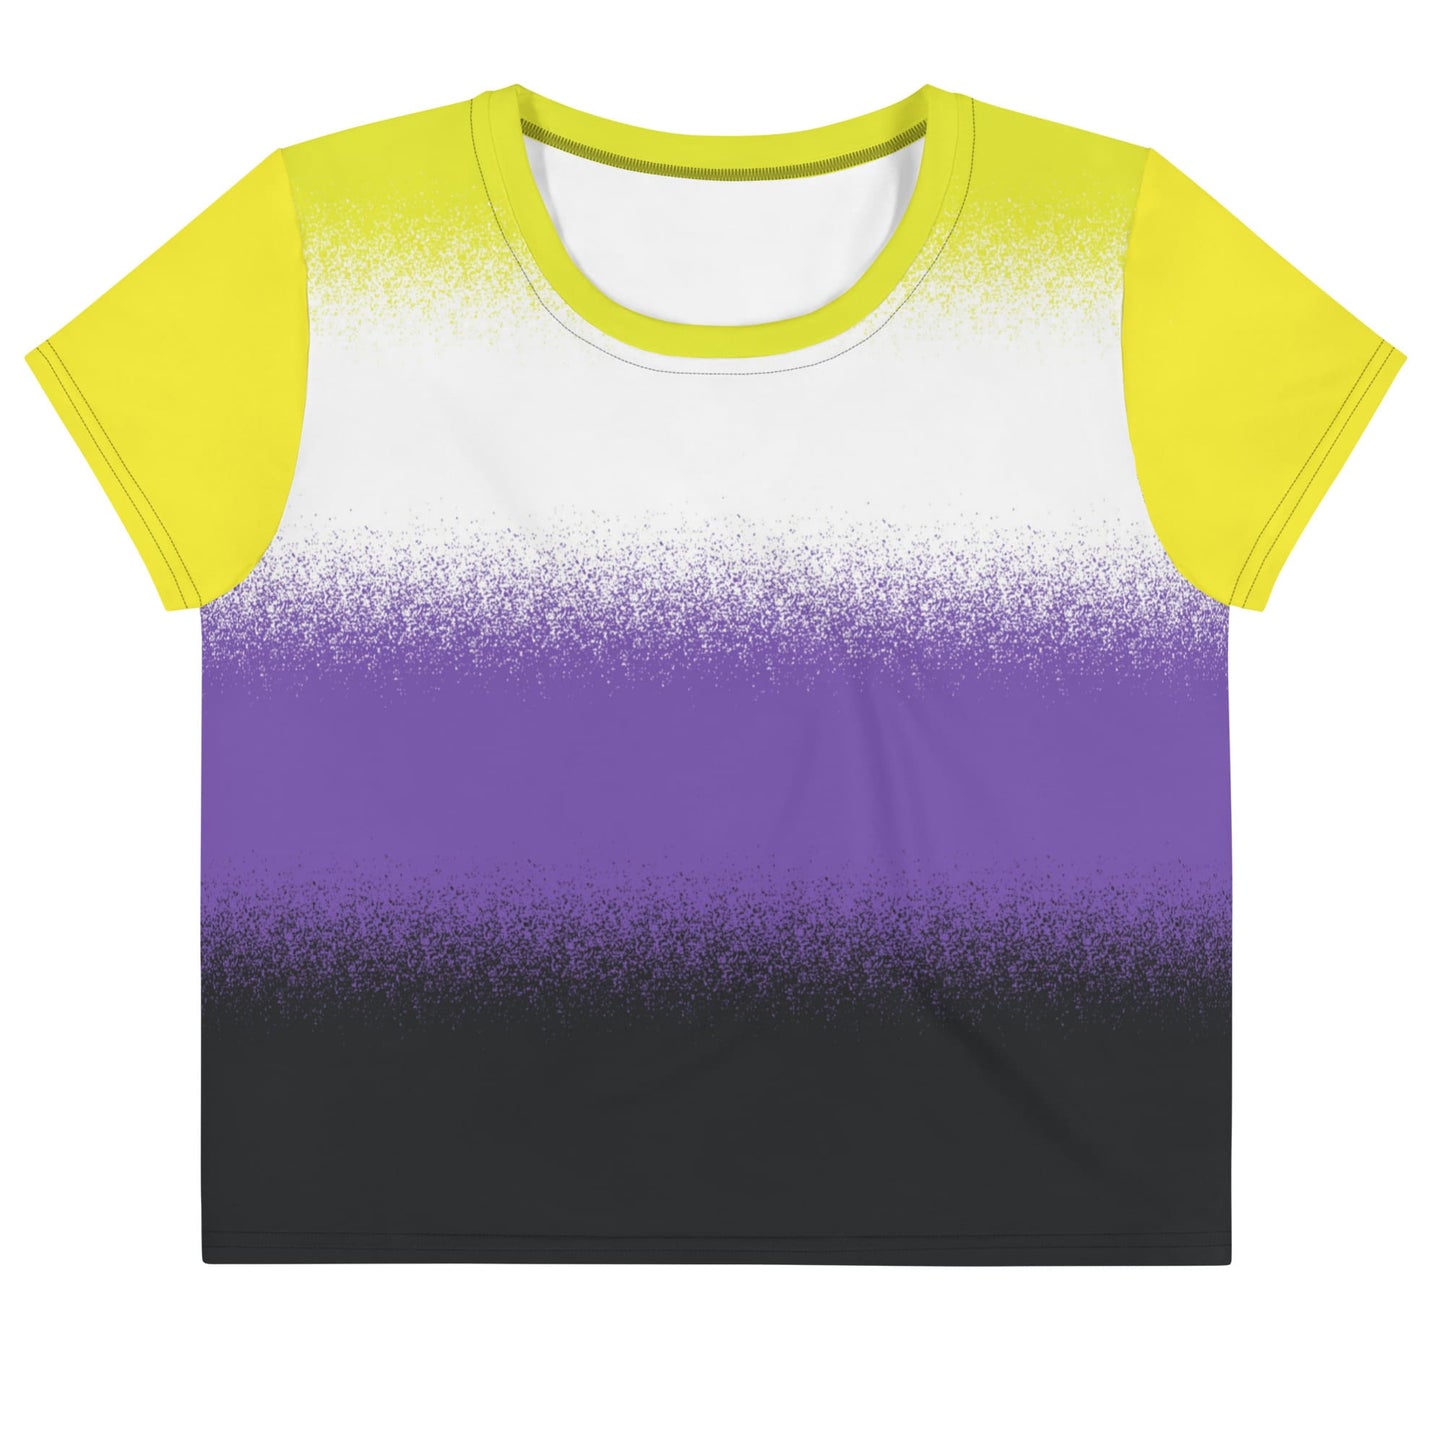 nonbinary crop top, enby cropped shirt with wings on back, flatlay front